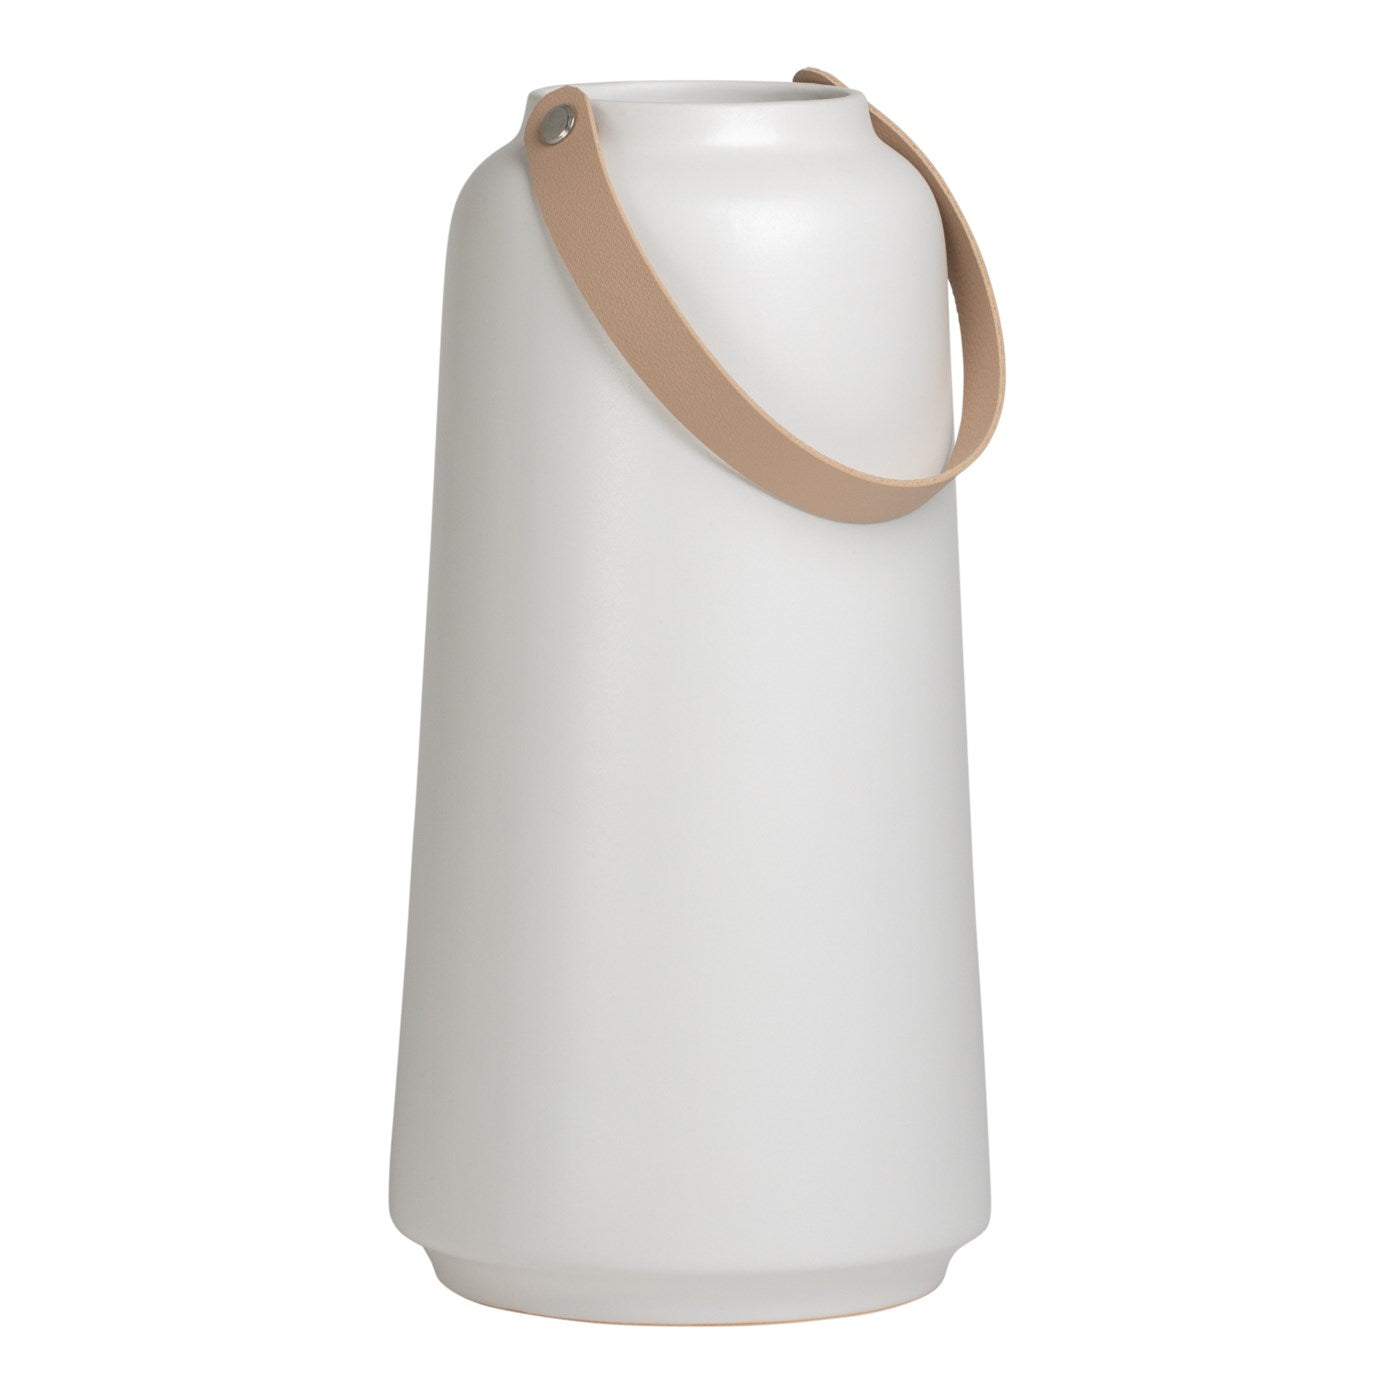 Lido Ceramic Vase with Faux Leather Handle